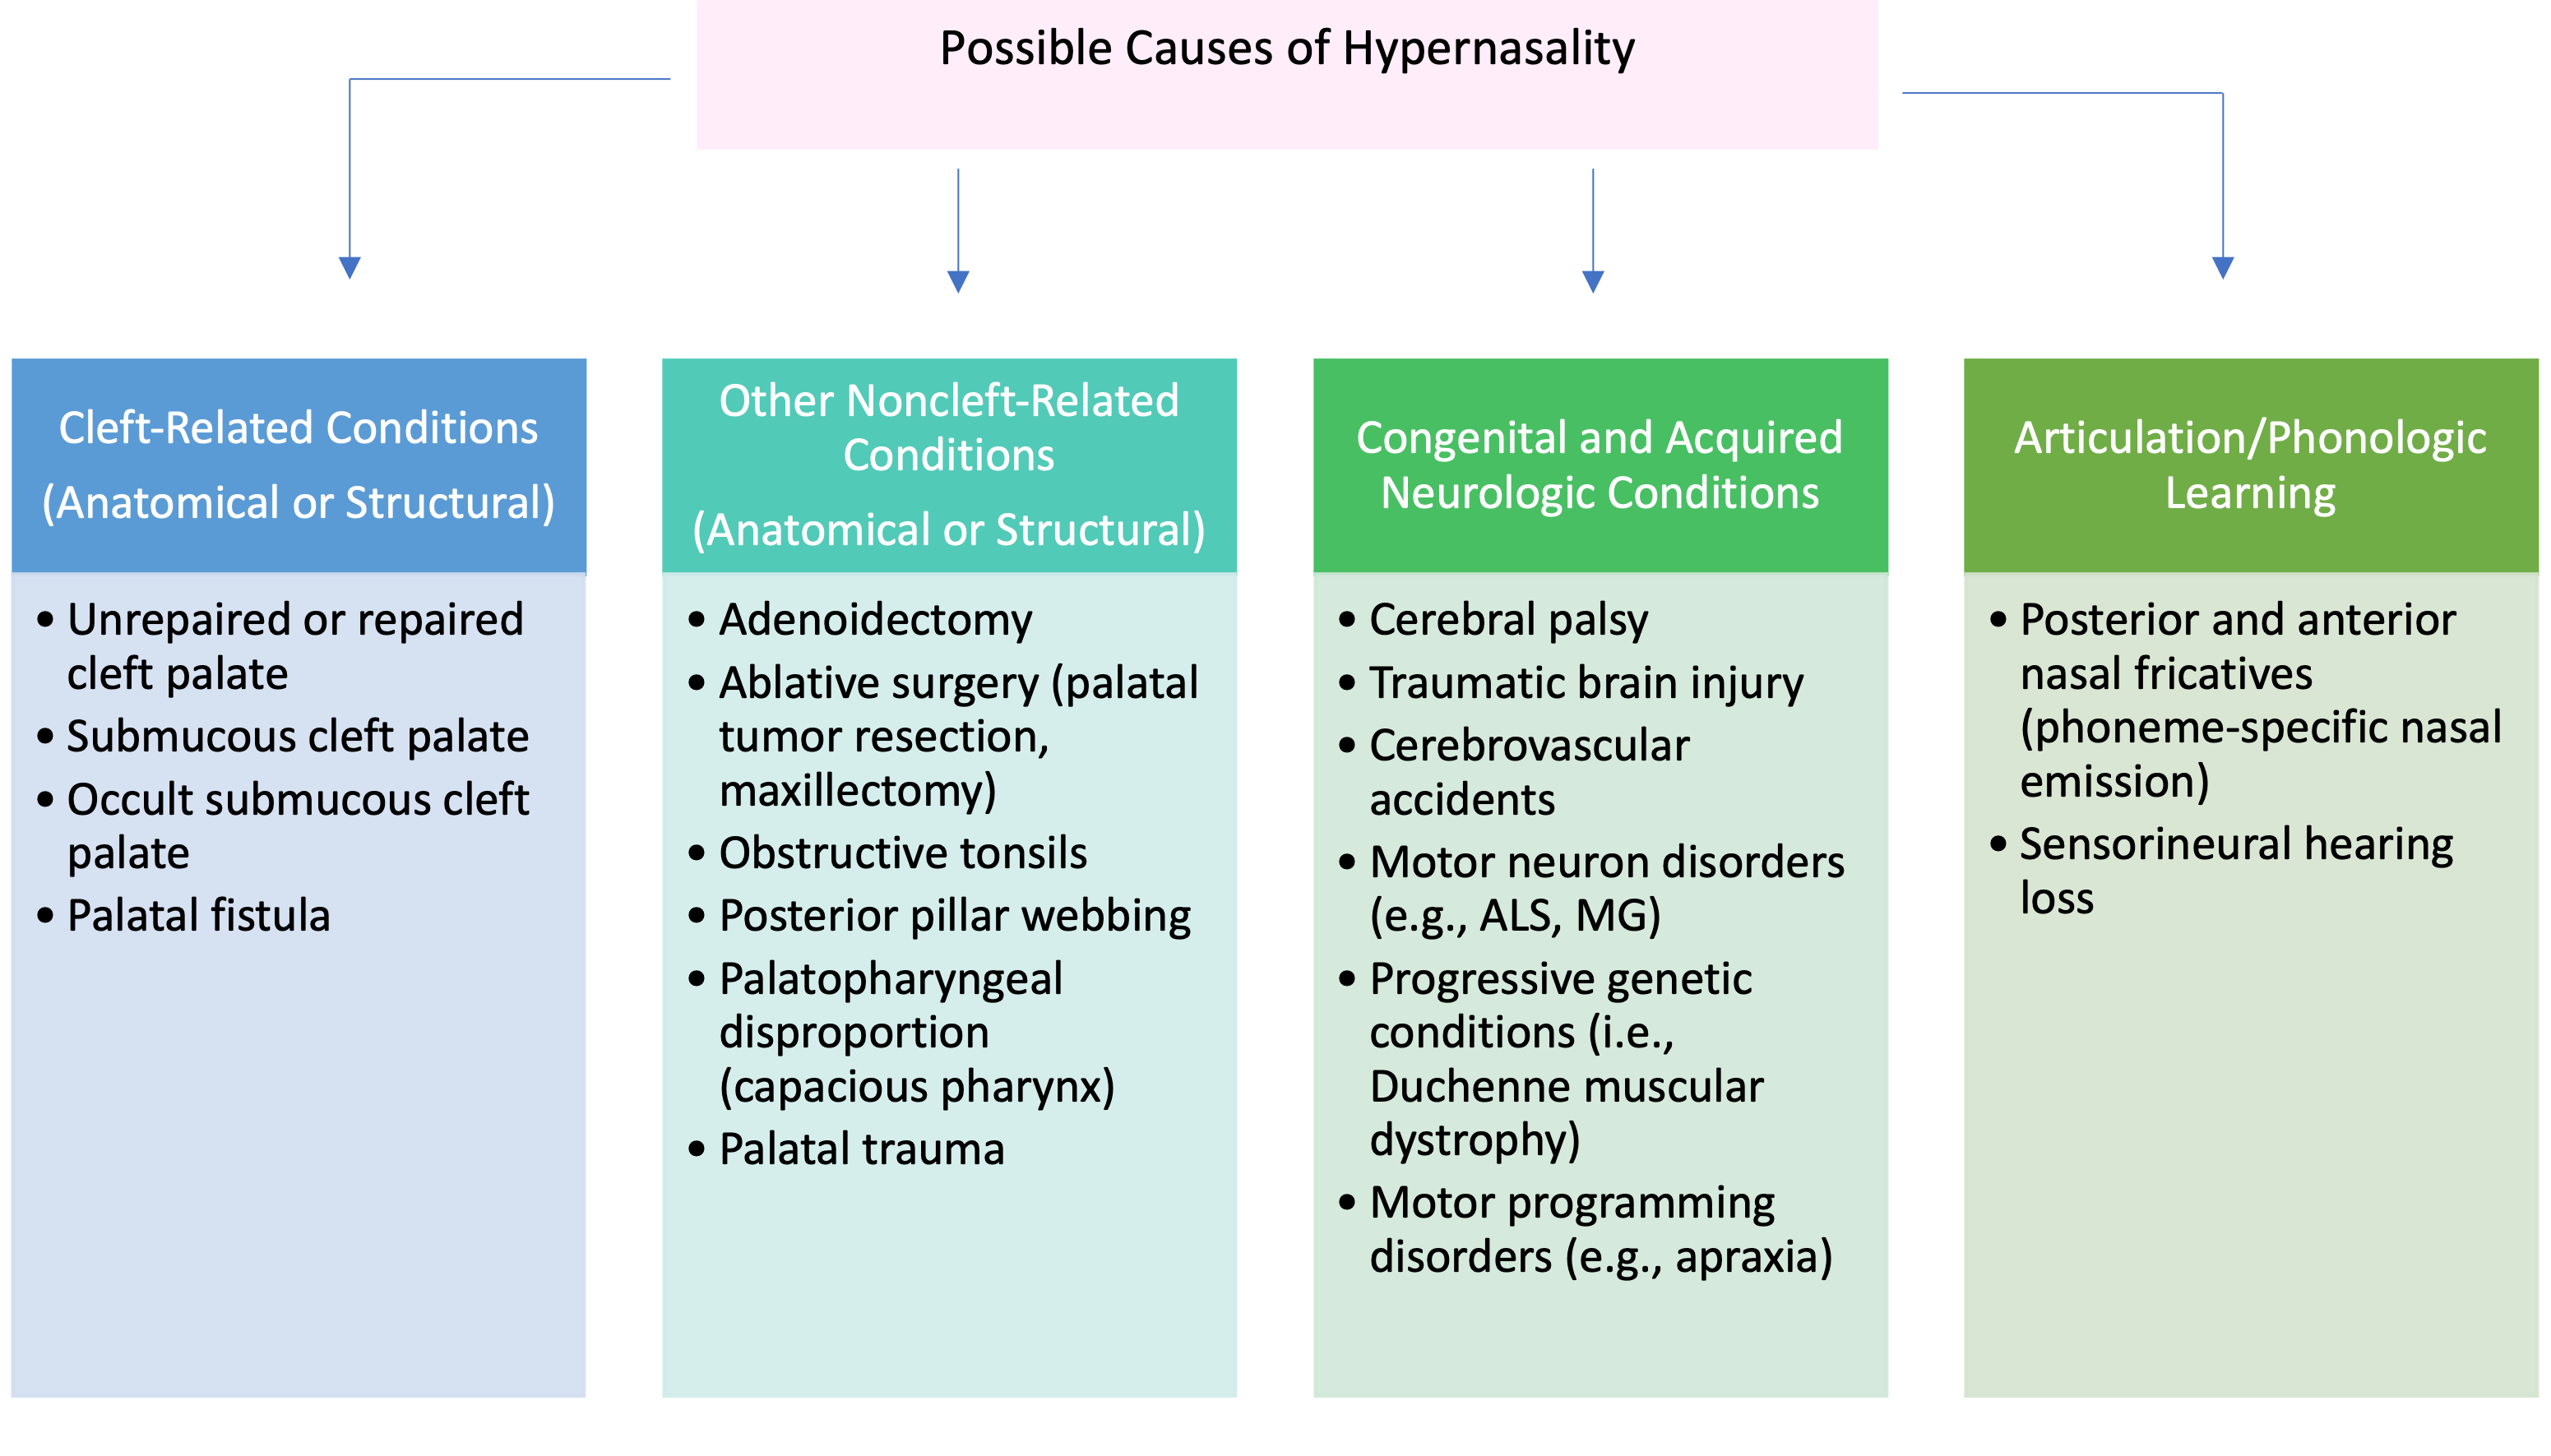 Possible-Causes-of-Hypernasality.png